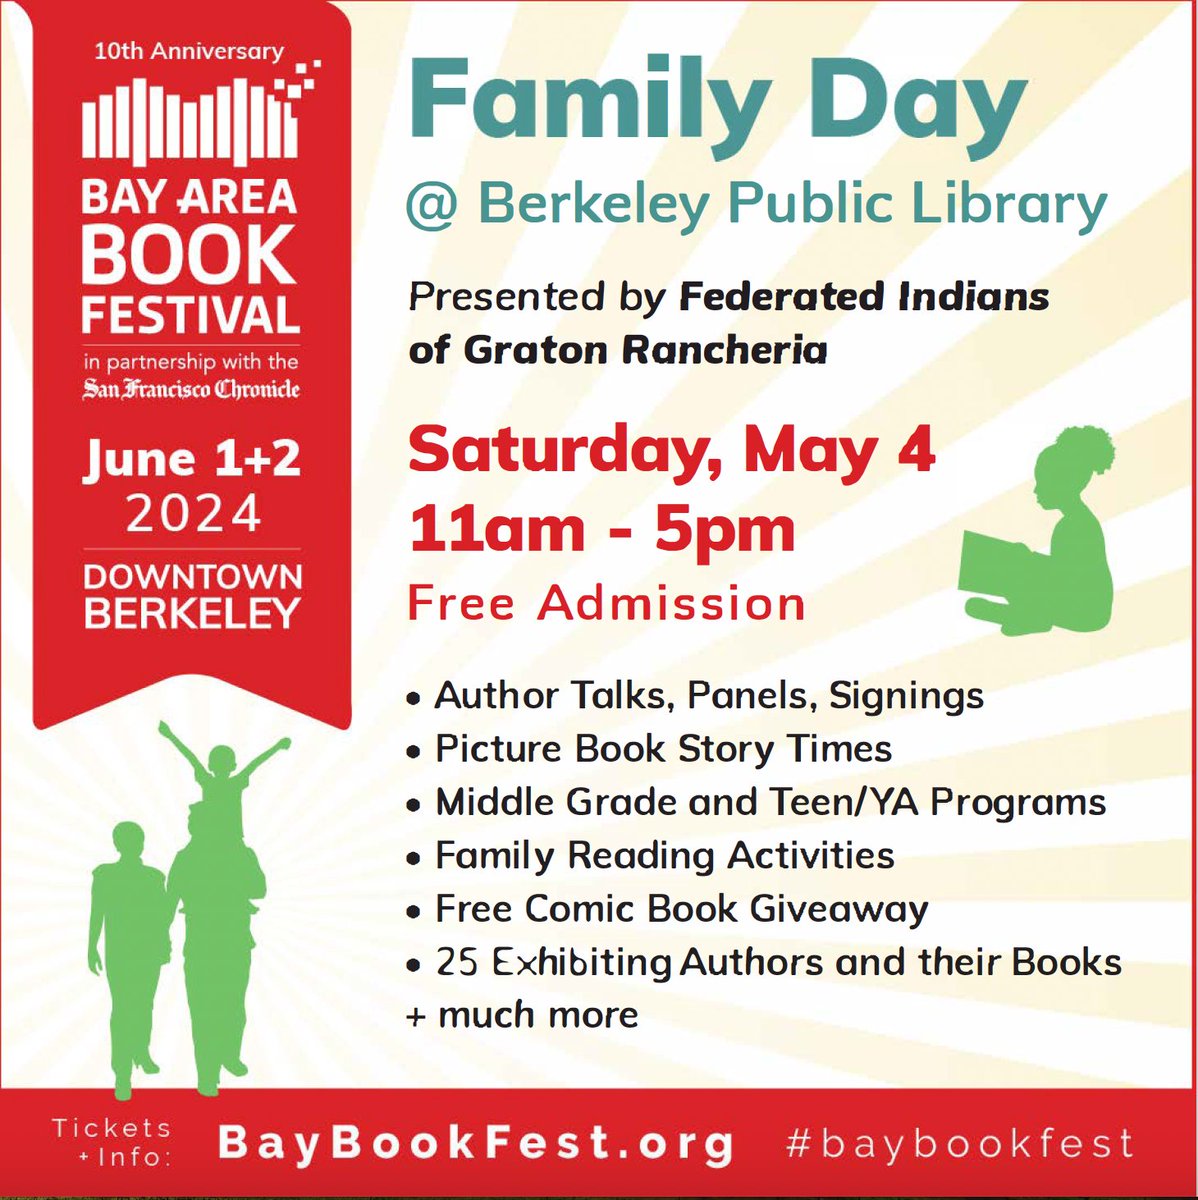 Join me next Saturday at the #baybookfest Family Day! I'll be speaking on two panels - 1) Storytime: Corazón (featuring picture books by me, Michael Genhart, and Joe Cepeda) 2) Middle School Beyond the Classroom (with Marissa Moss, Kekla Magoon, and Nicole Chen)